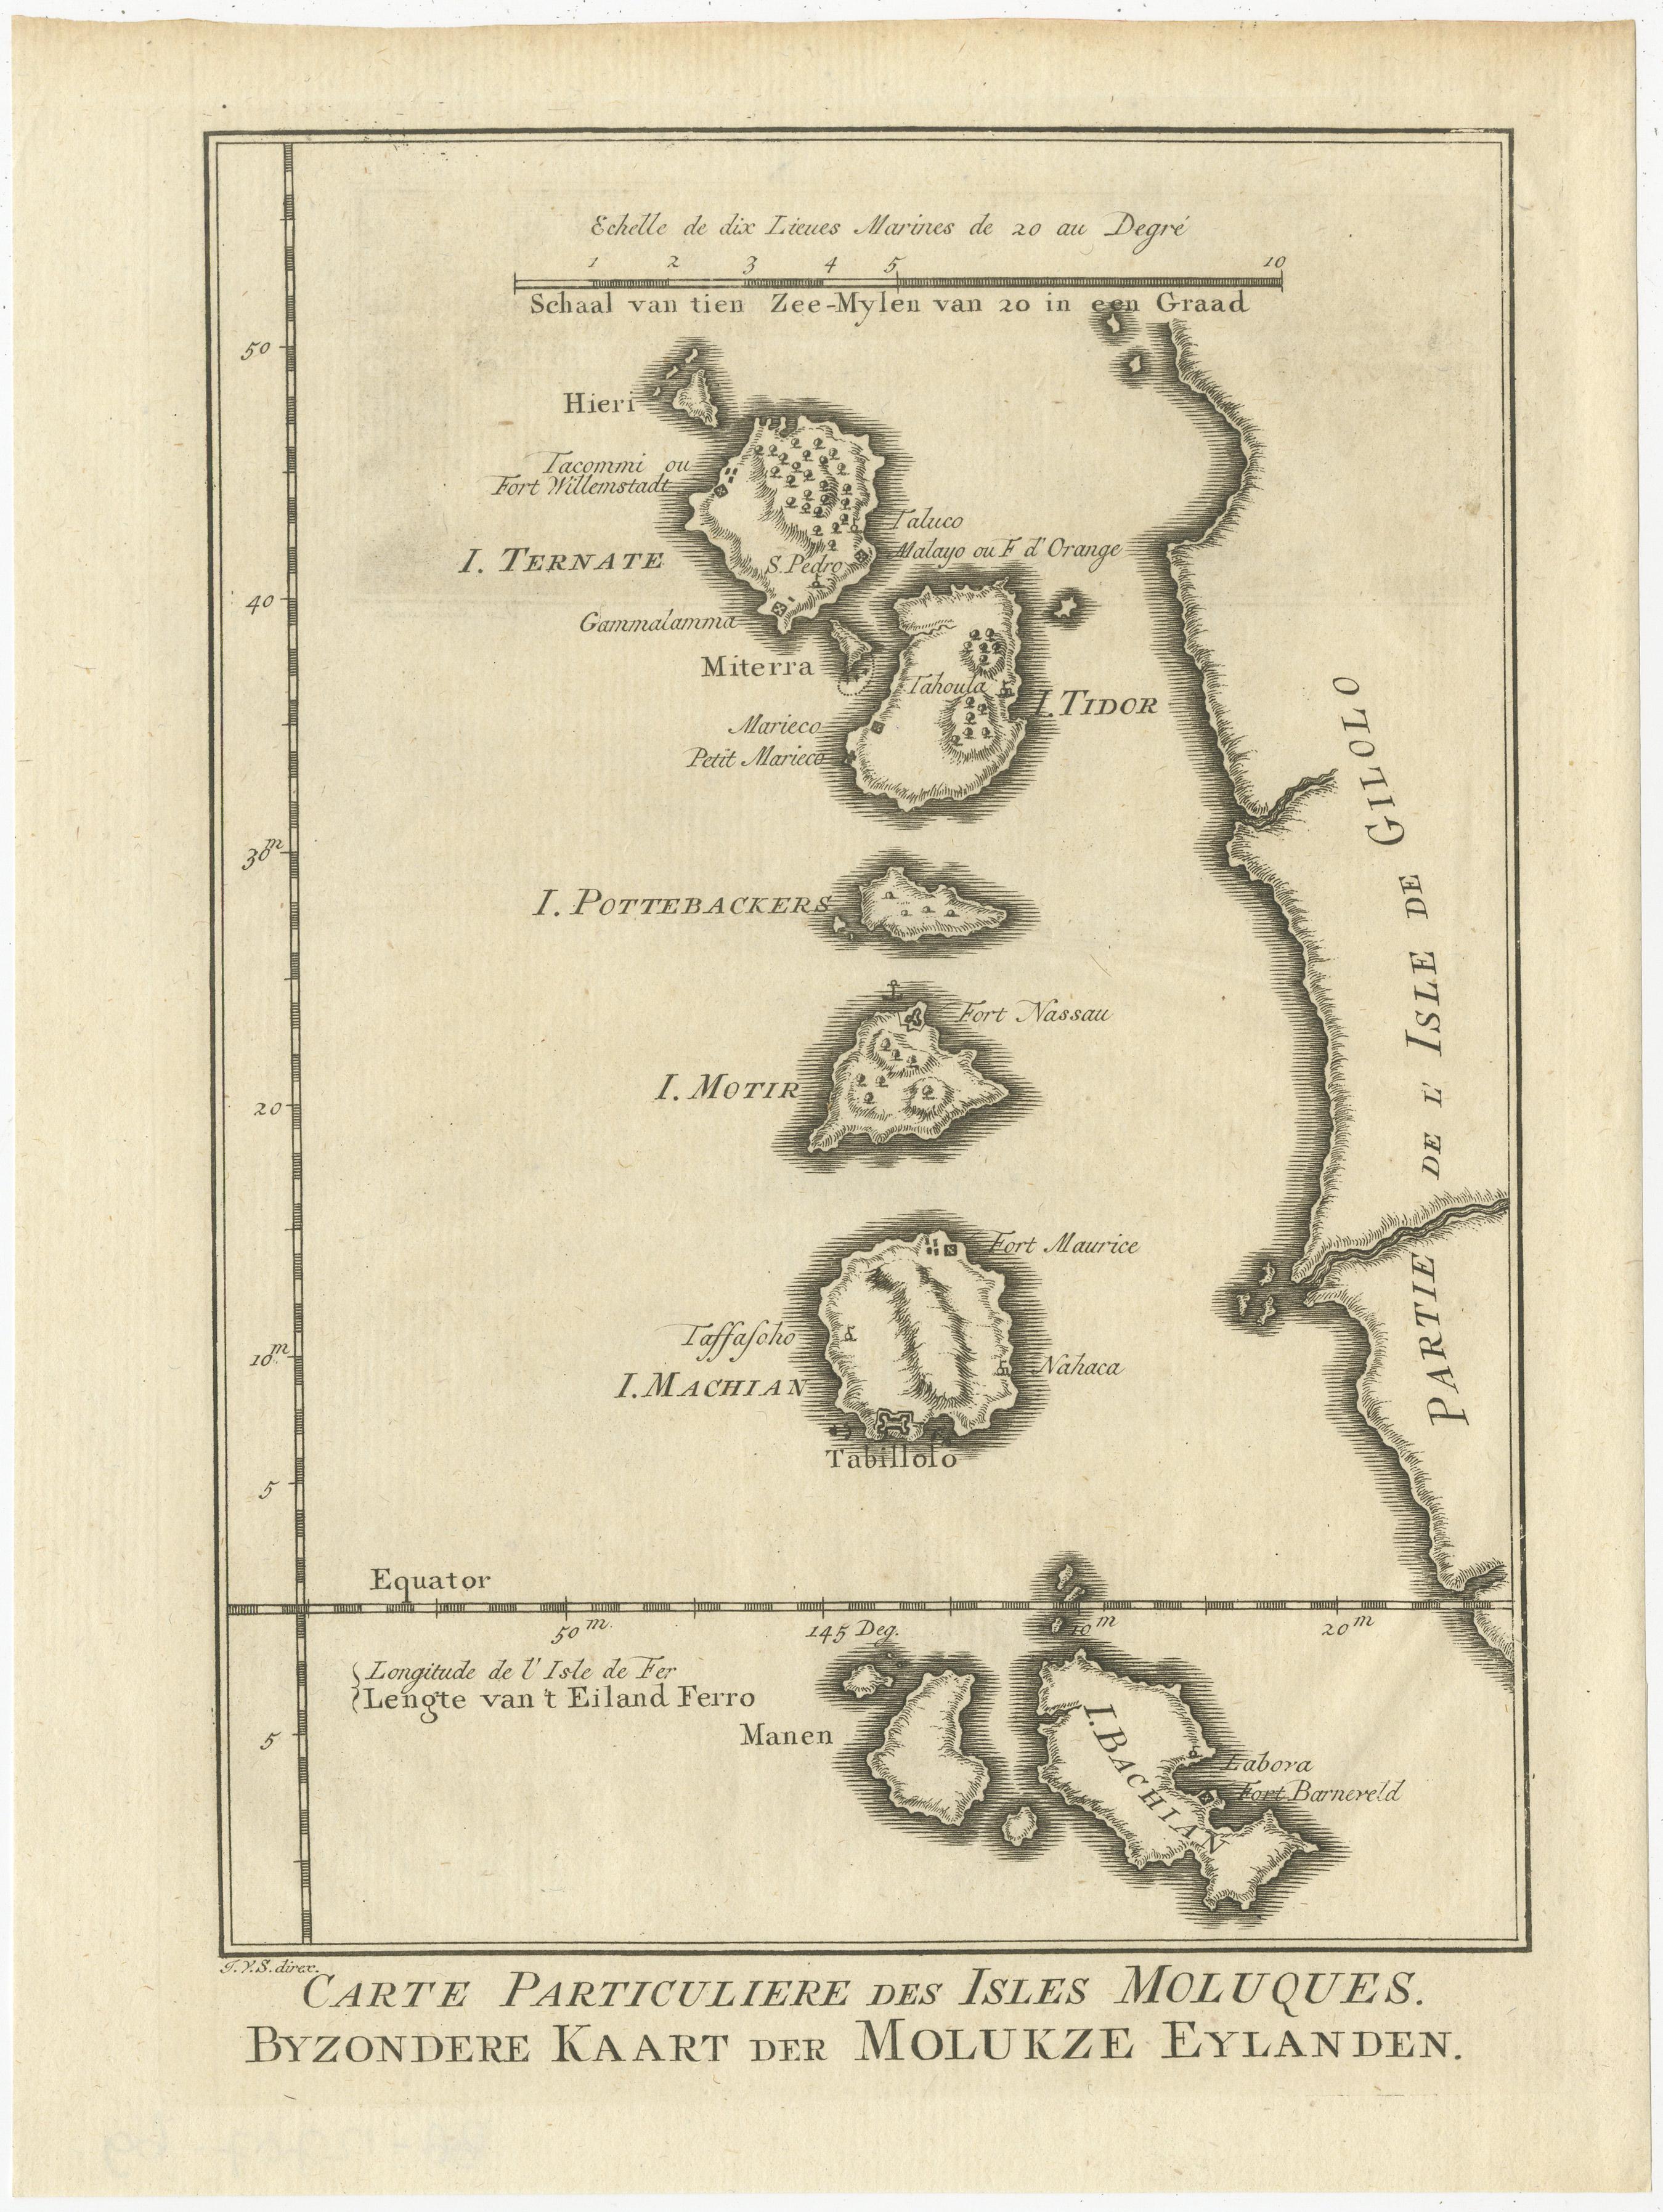 Antique map titled 'Carte Particuliere des Isles Moluques - Byzondere Kaart der Molukze Eylanden'. This map depicts the islands of Herij, Ternate, Tidor, Pottebackers, Timor, Machian and Bachian. The Moluccan islands were once part of the Dutch East